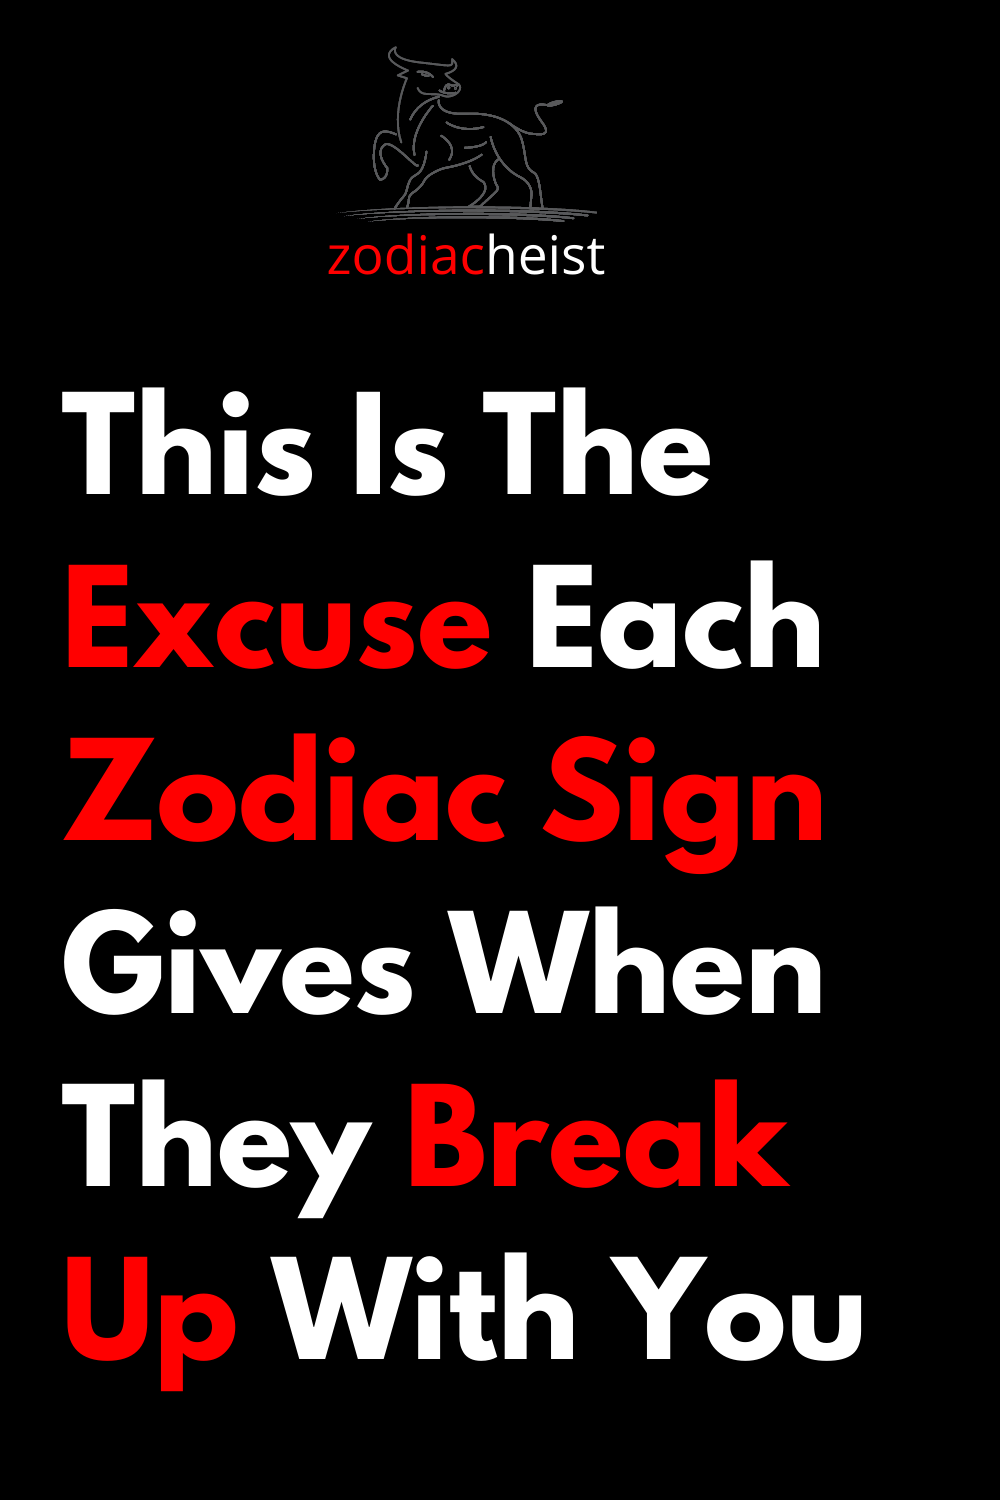 This Is The Excuse Each Zodiac Sign Gives When They Break Up With You